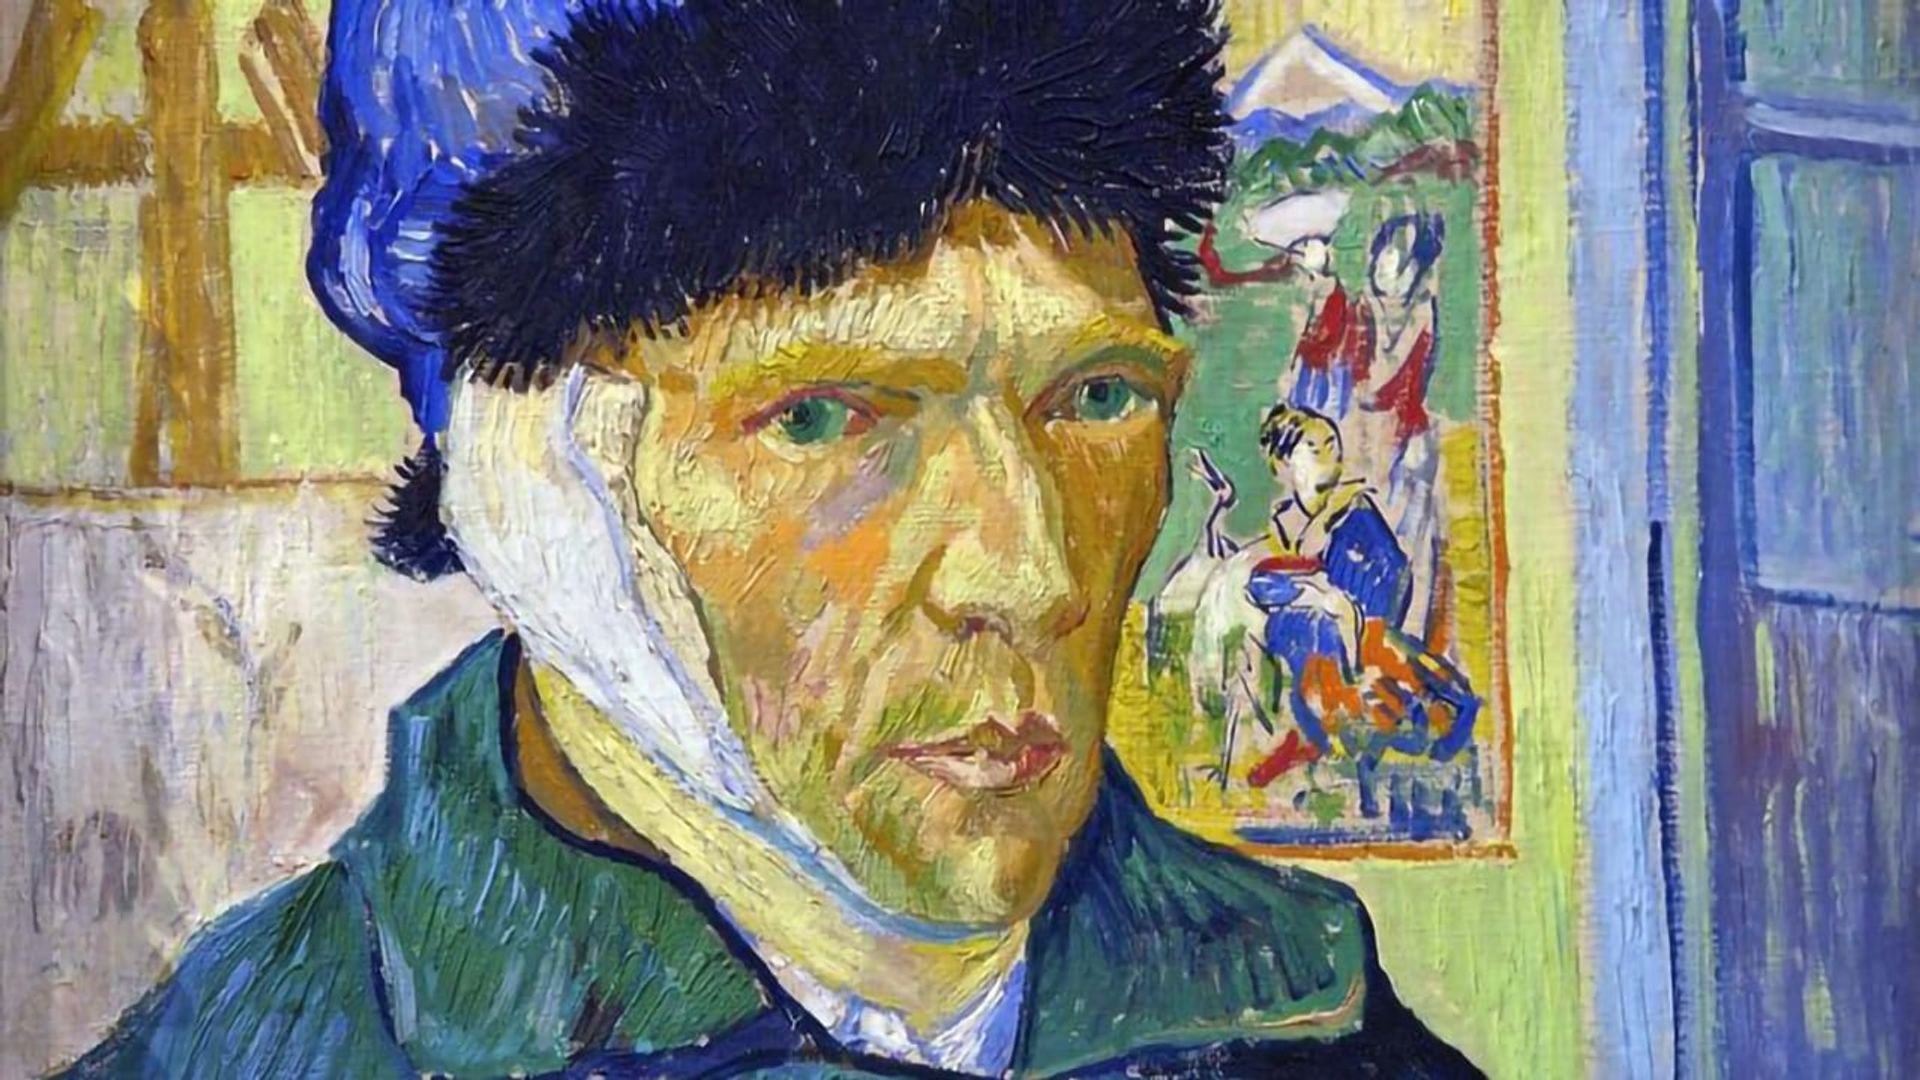 The Mystery of Van Gogh's Ear background